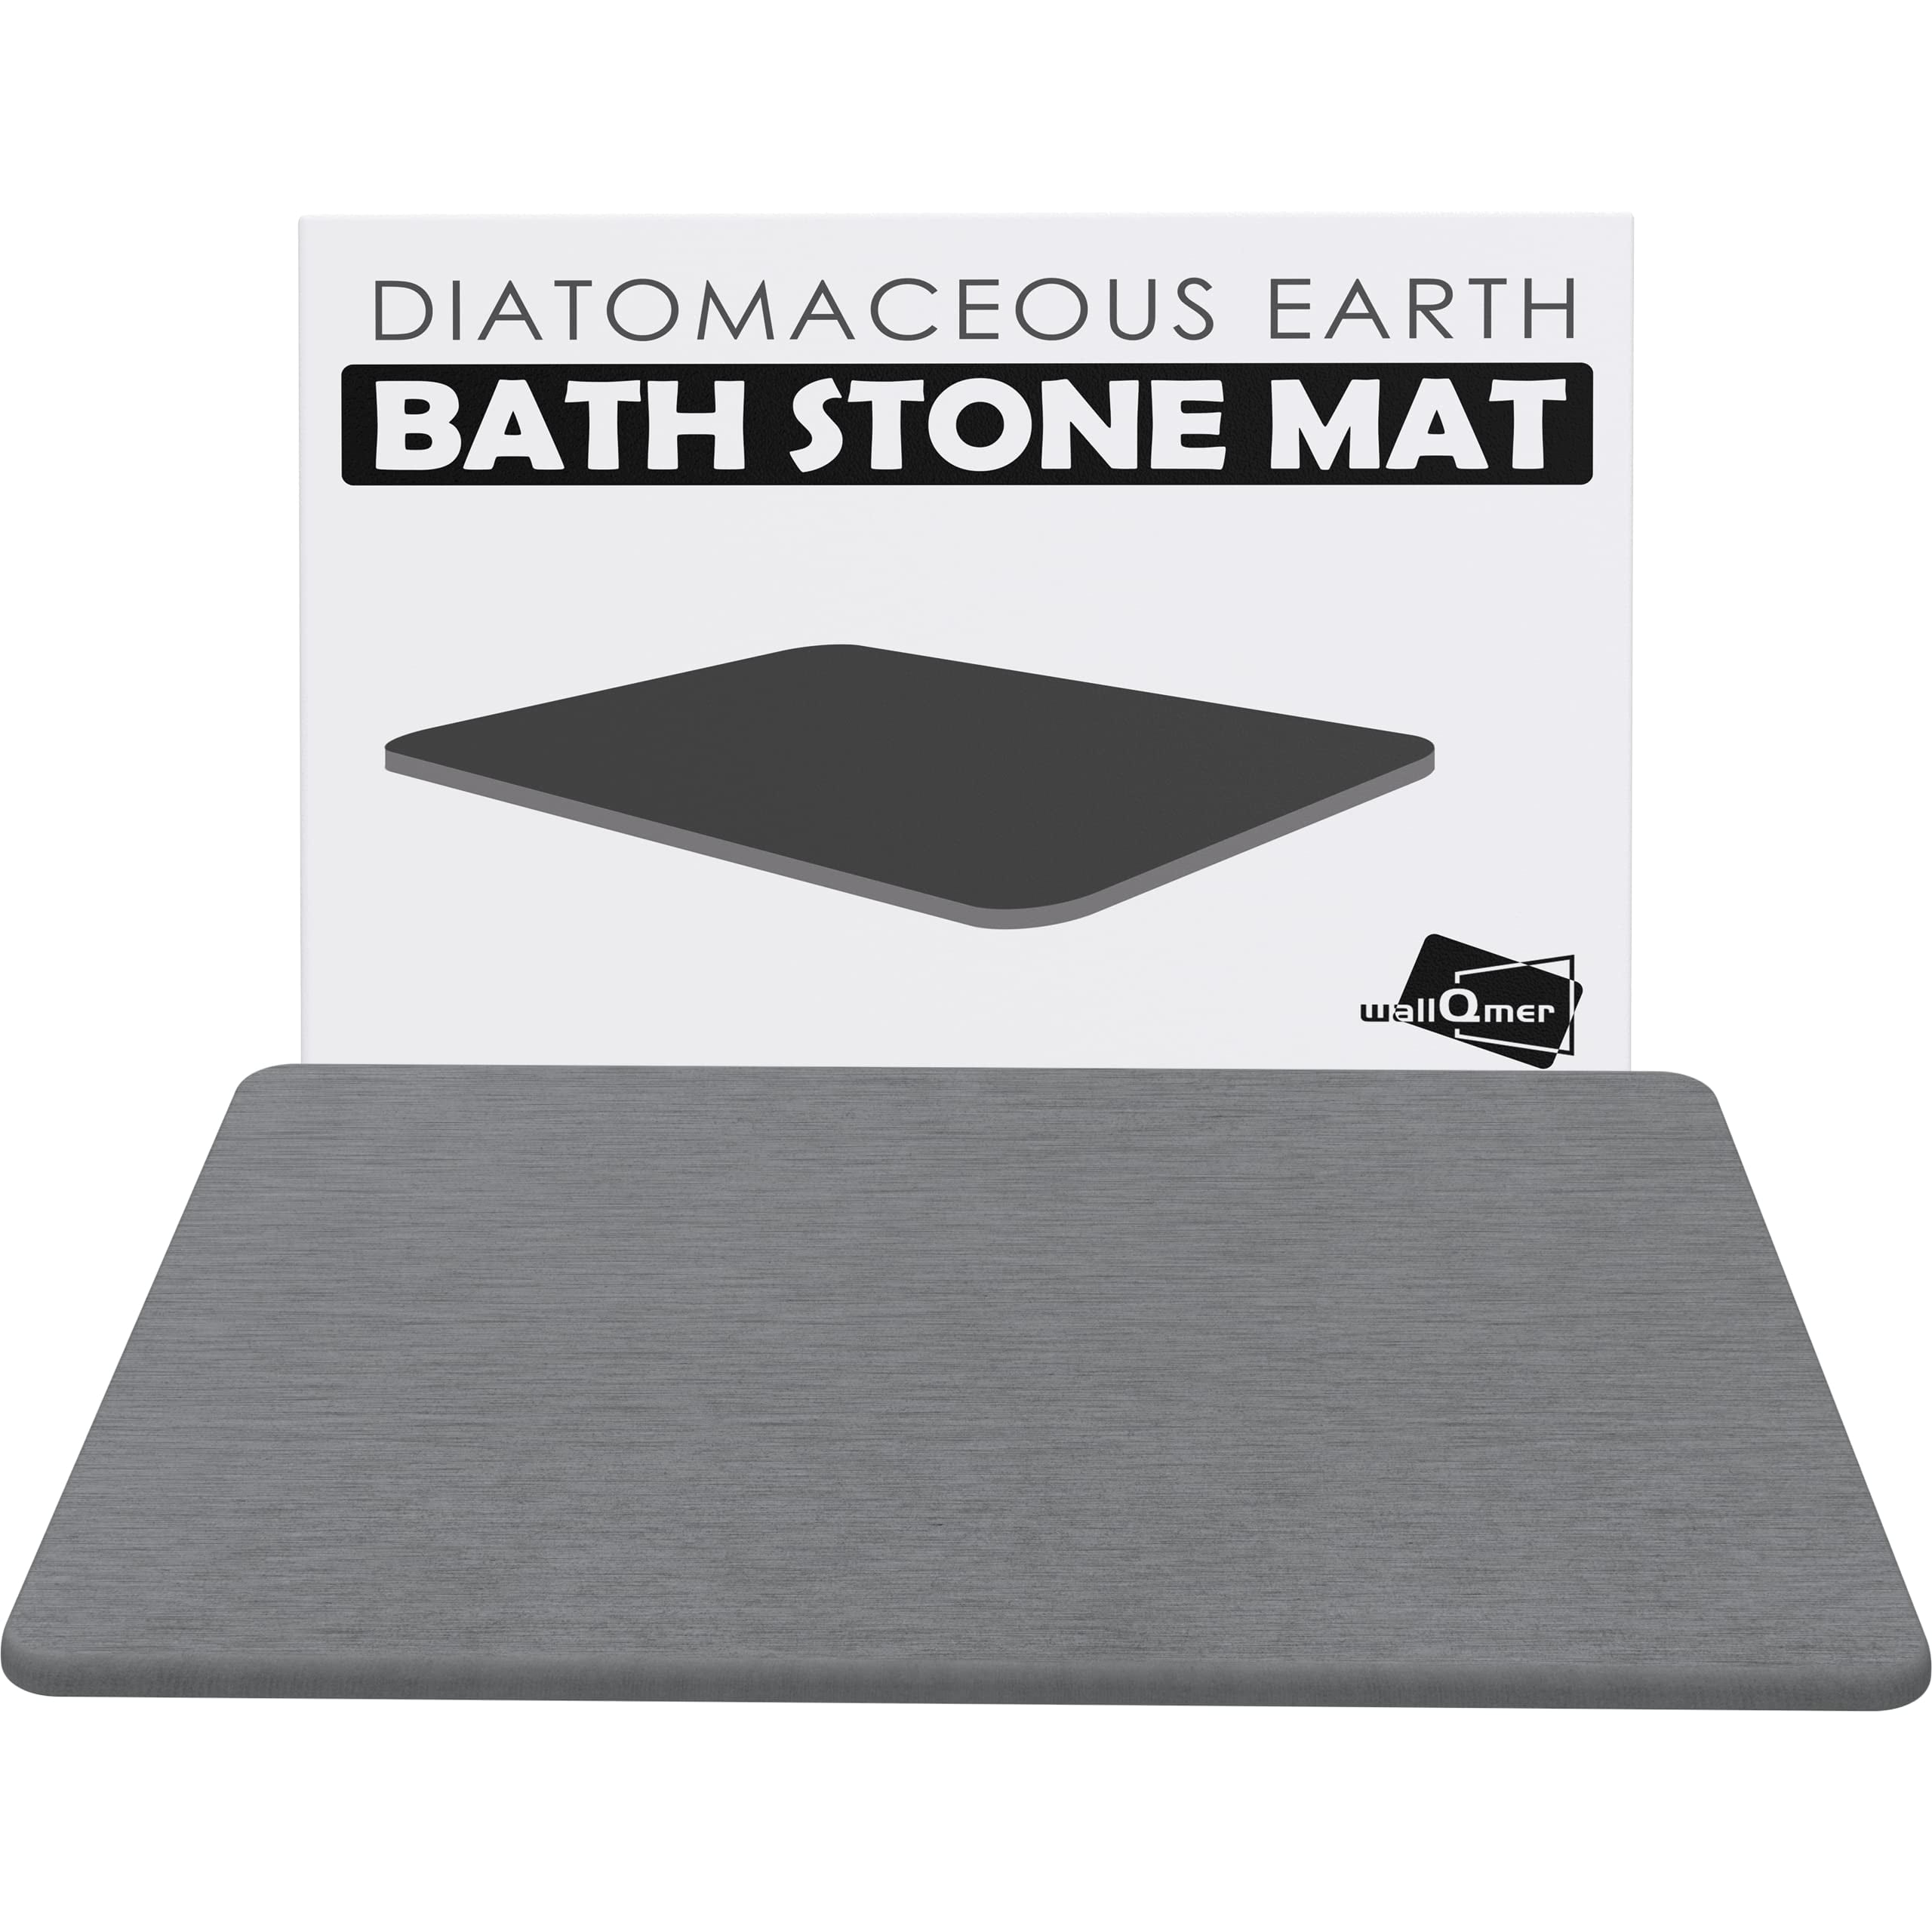 Homlab Bath Bathroom Rugs Mat Non Slip, Gray Diatomaceous Earth Stone Farmhouse Water Absorbent Washable Thin Small Bathmat Set with Rubber Back Quick Dry